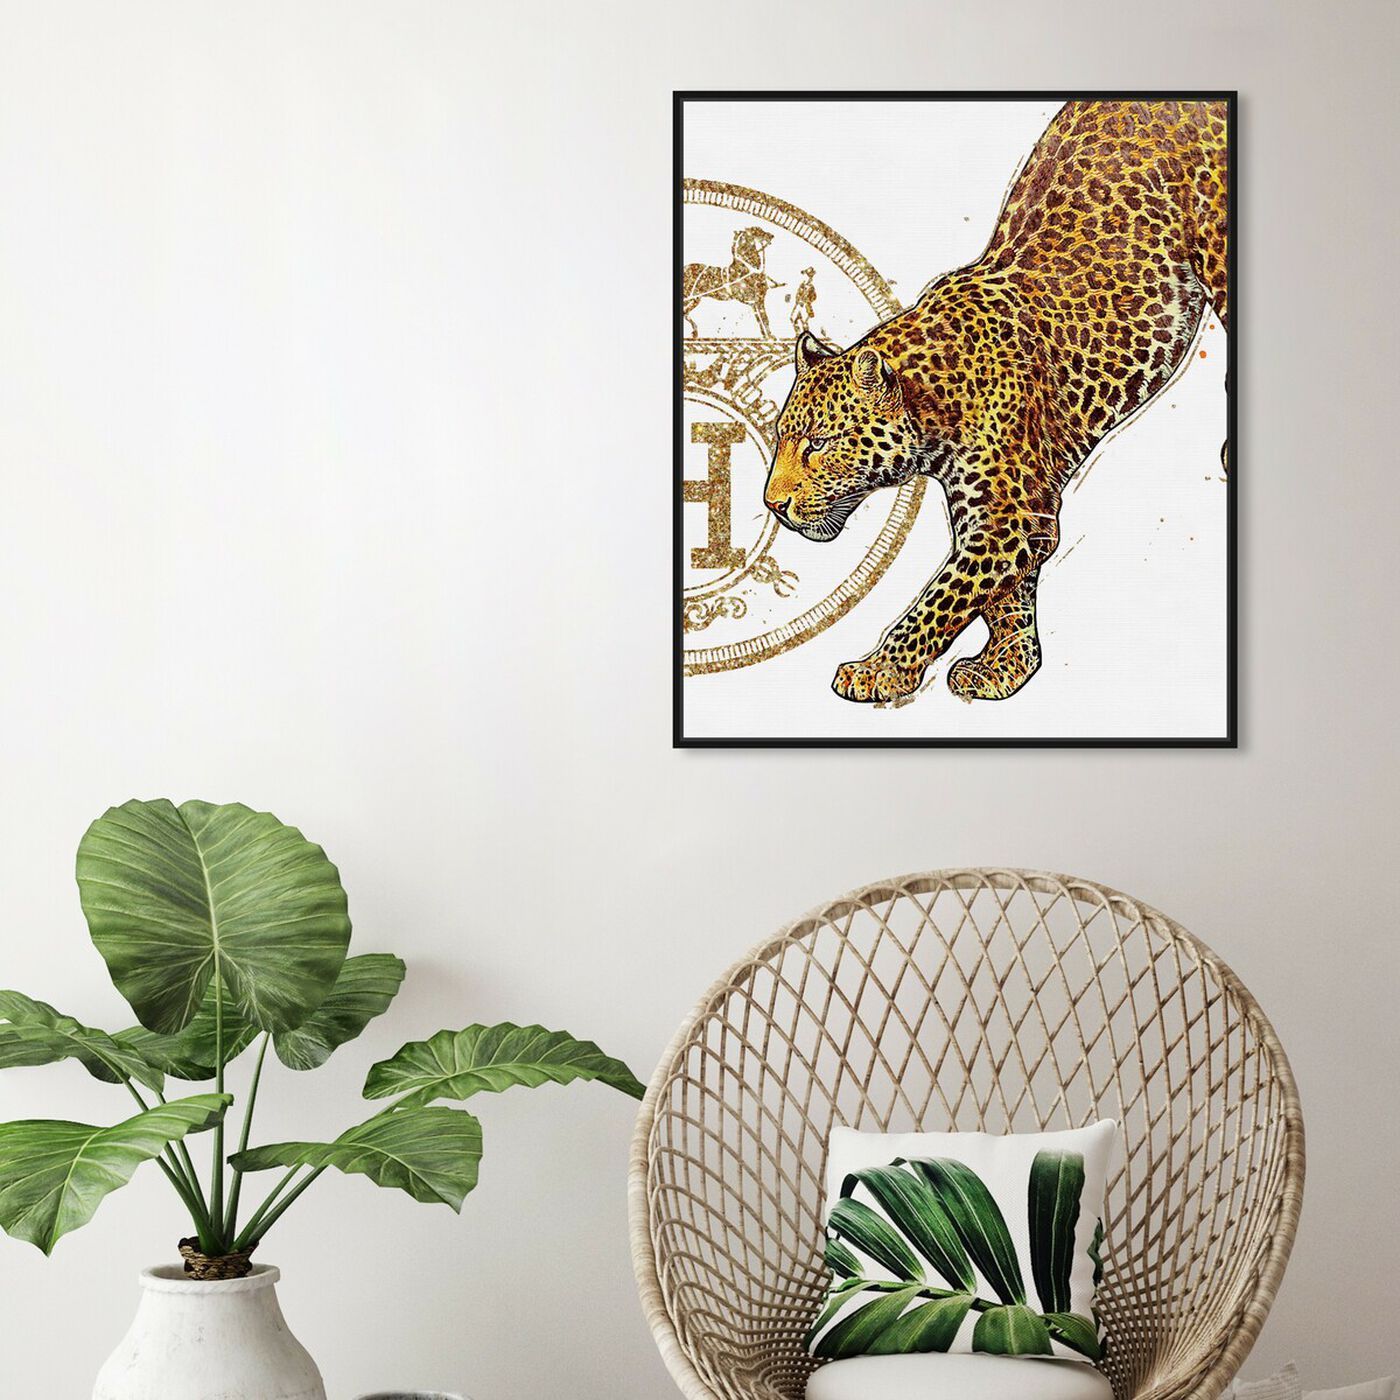 Hanging view of Jaguar Class II featuring fashion and glam and lifestyle art.